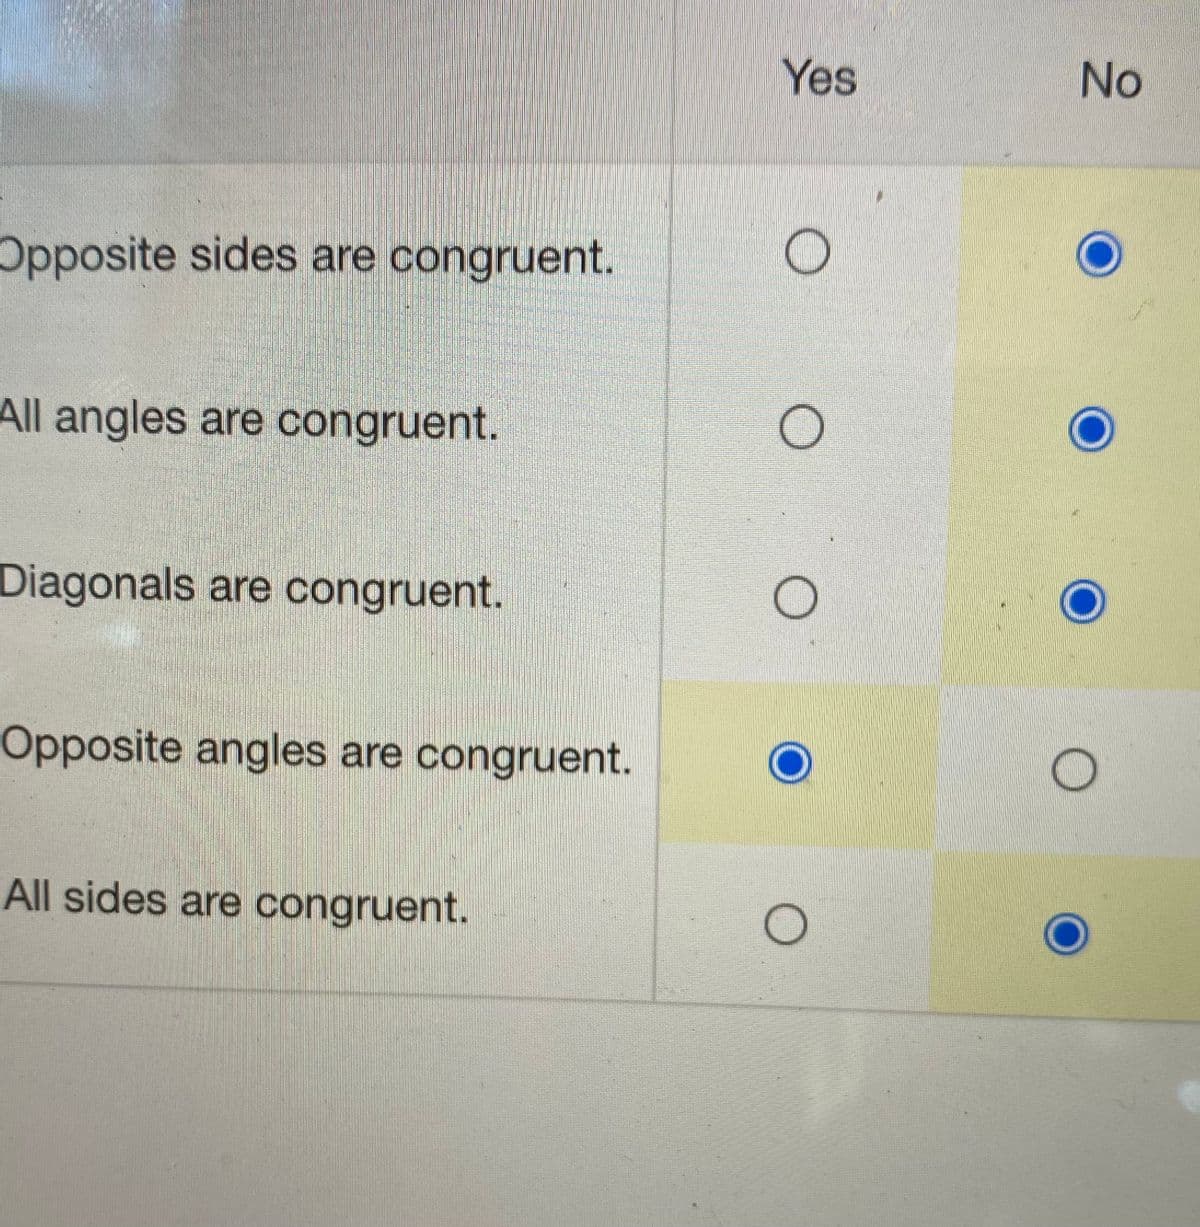 Yes
No
Opposite sides are congruent.
All angles are congruent.
Diagonals are congruent.
Opposite angles are congruent.
All sides are congruent.
